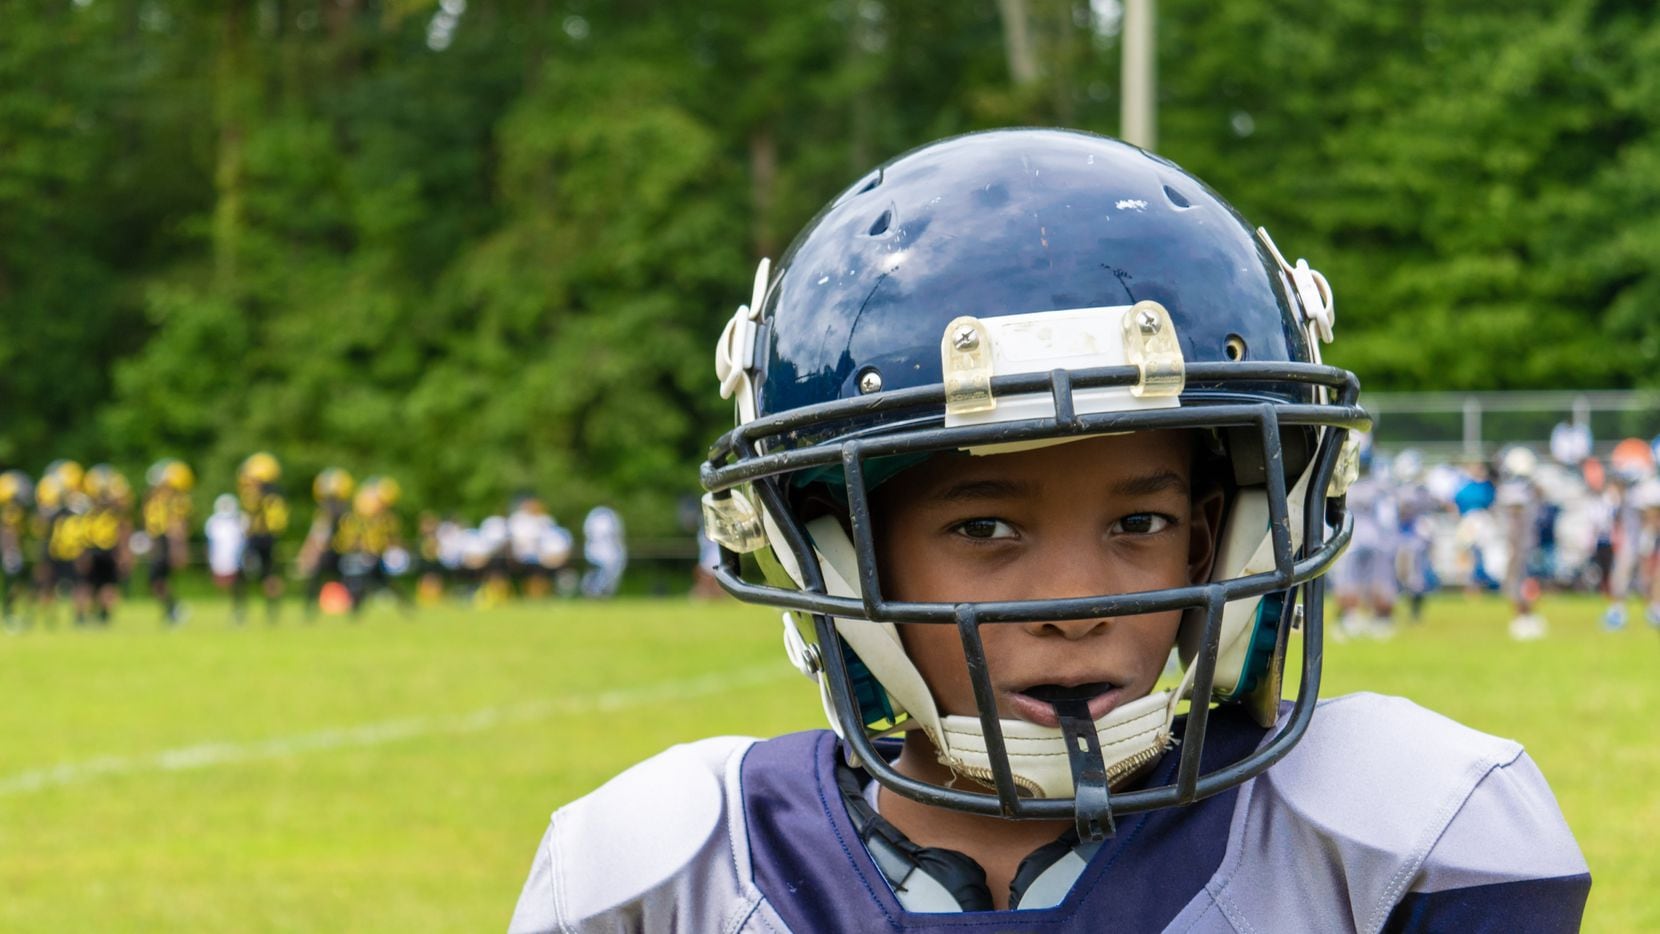 A young boy wearing a football helmet and uniform on a football field.